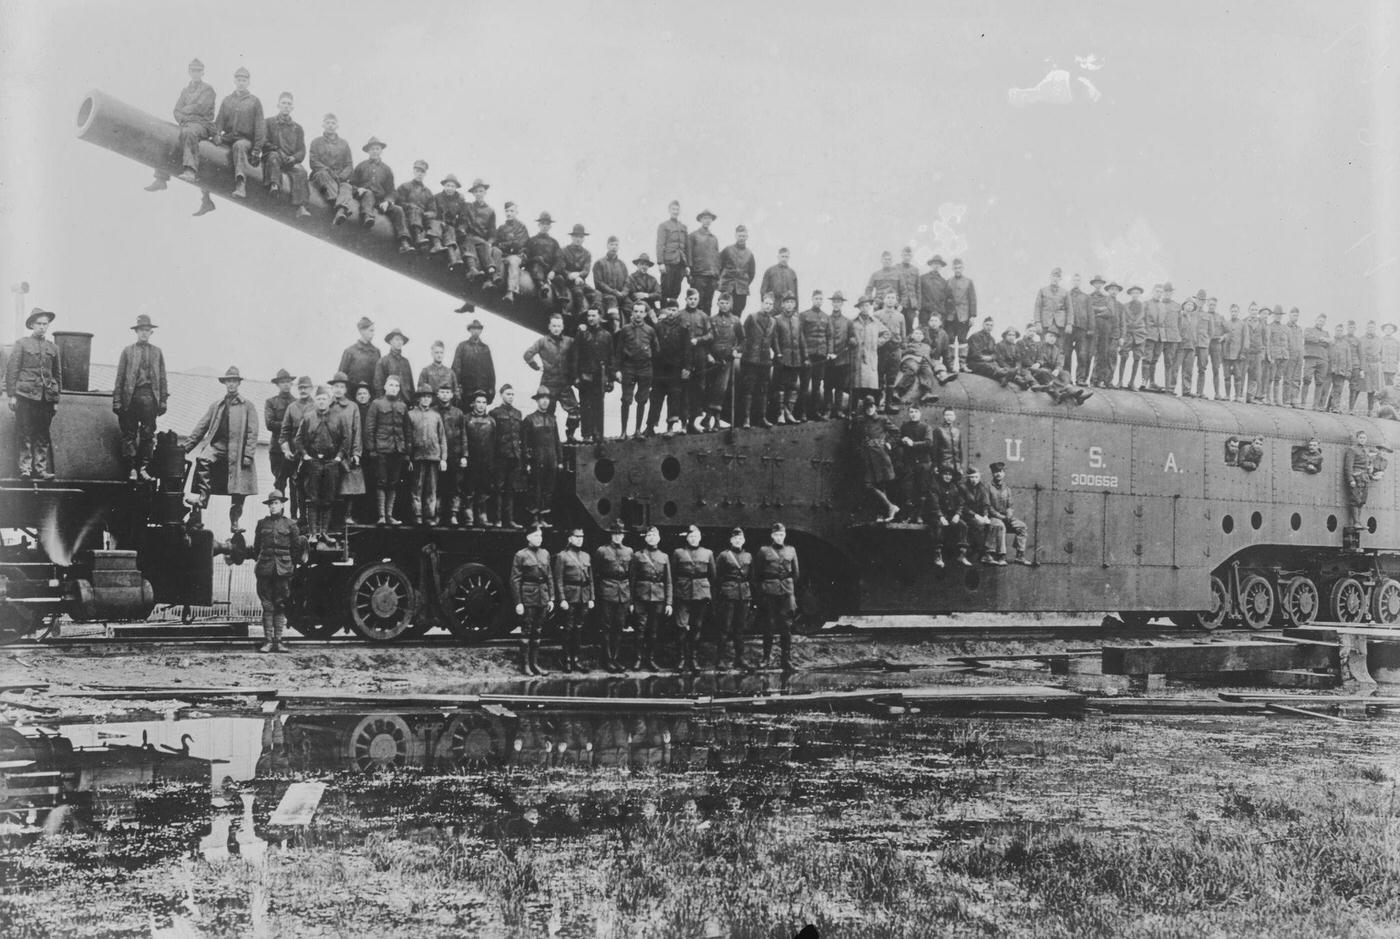 US military ordinance on a railway artillery train in France during World War I, 1918.